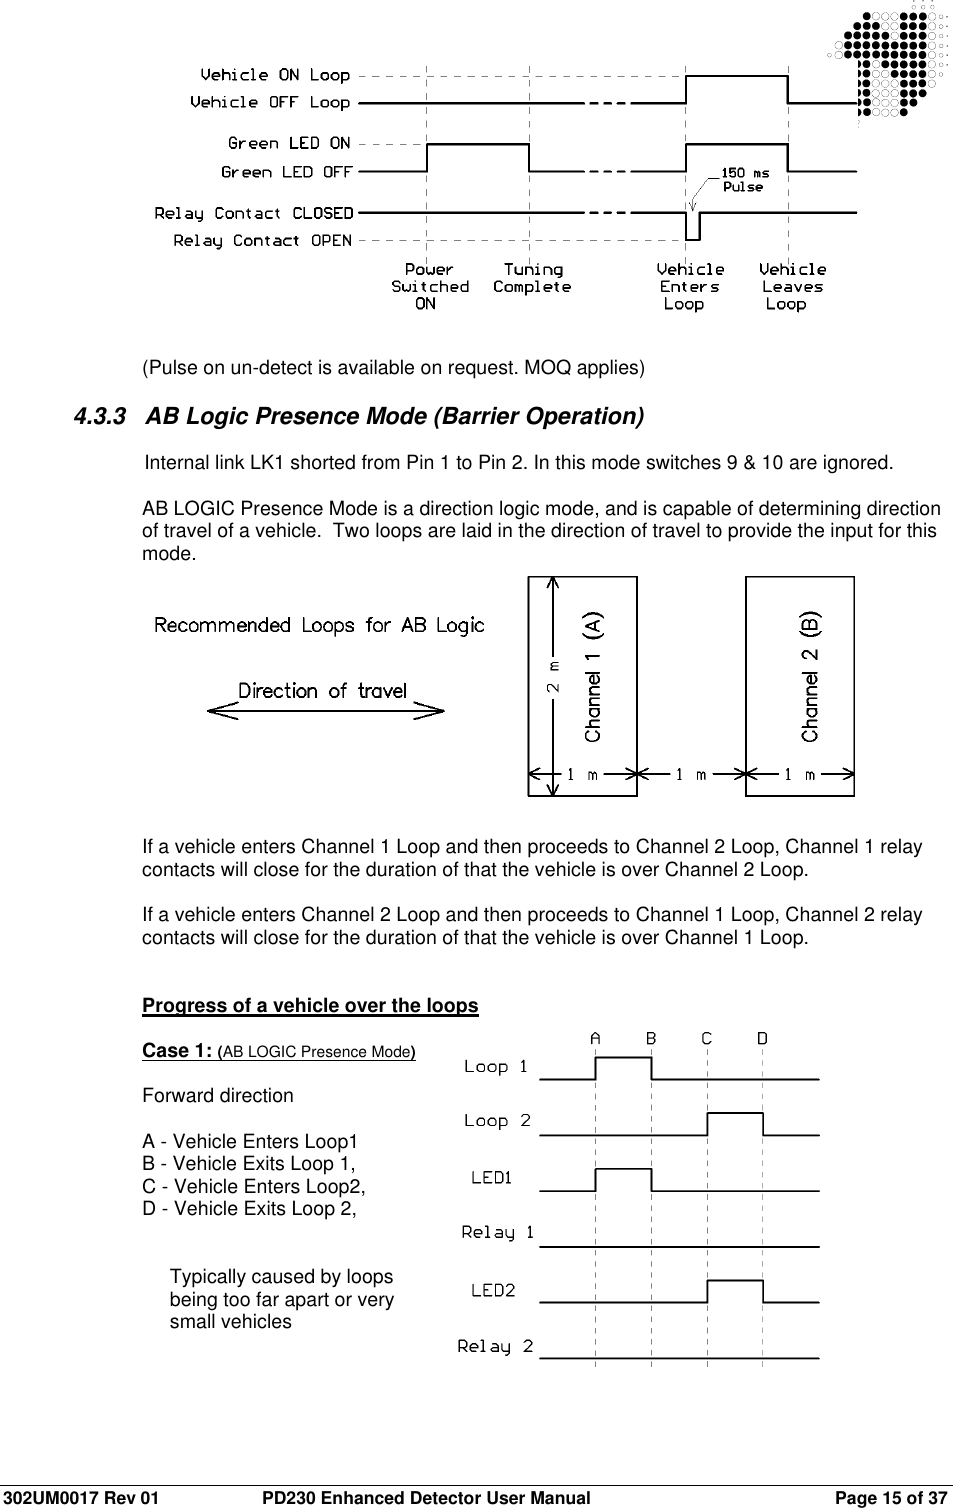  302UM0017 Rev 01  PD230 Enhanced Detector User Manual   Page 15 of 37               (Pulse on un-detect is available on request. MOQ applies)  4.3.3  AB Logic Presence Mode (Barrier Operation)    Internal link LK1 shorted from Pin 1 to Pin 2. In this mode switches 9 &amp; 10 are ignored.  AB LOGIC Presence Mode is a direction logic mode, and is capable of determining direction of travel of a vehicle.  Two loops are laid in the direction of travel to provide the input for this mode.             If a vehicle enters Channel 1 Loop and then proceeds to Channel 2 Loop, Channel 1 relay contacts will close for the duration of that the vehicle is over Channel 2 Loop.  If a vehicle enters Channel 2 Loop and then proceeds to Channel 1 Loop, Channel 2 relay contacts will close for the duration of that the vehicle is over Channel 1 Loop.   Progress of a vehicle over the loops  Case 1: (AB LOGIC Presence Mode)  Forward direction  A - Vehicle Enters Loop1 B - Vehicle Exits Loop 1, C - Vehicle Enters Loop2,  D - Vehicle Exits Loop 2,   Typically caused by loops  being too far apart or very  small vehicles   